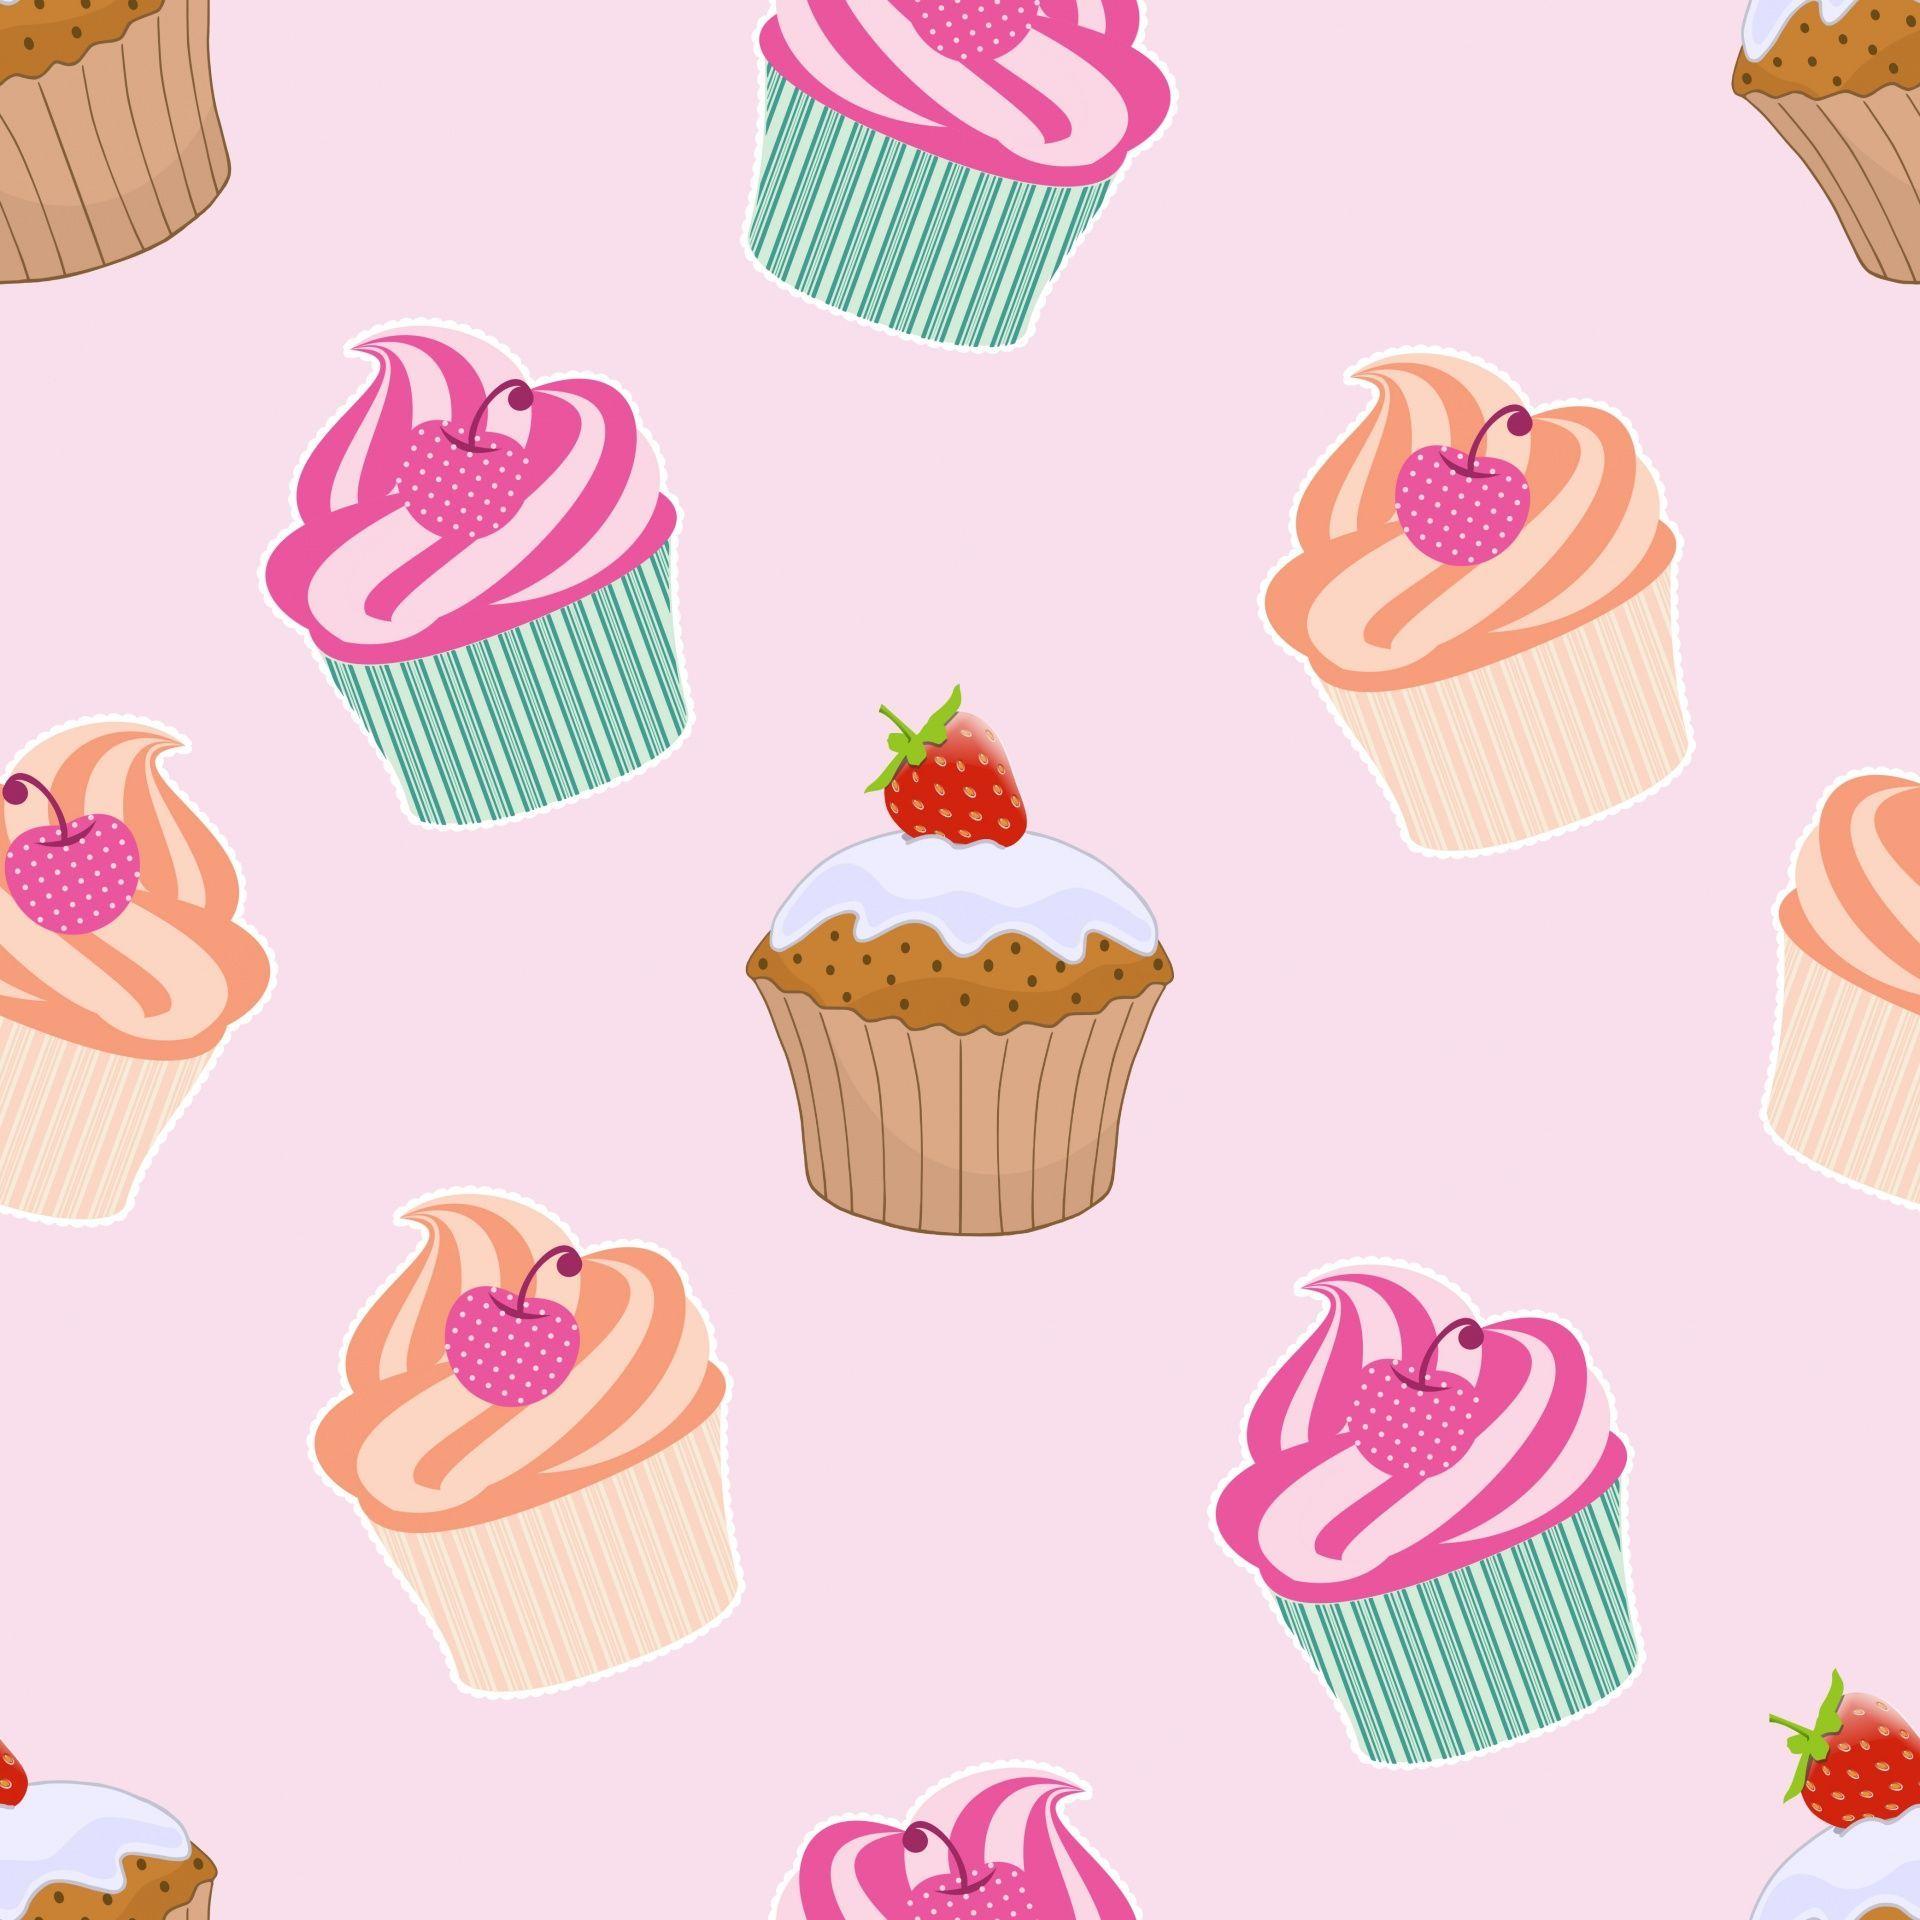 Cupcakes And Muffins Wallpaper. Cupcakes wallpaper, Hello kitty image, Pink image